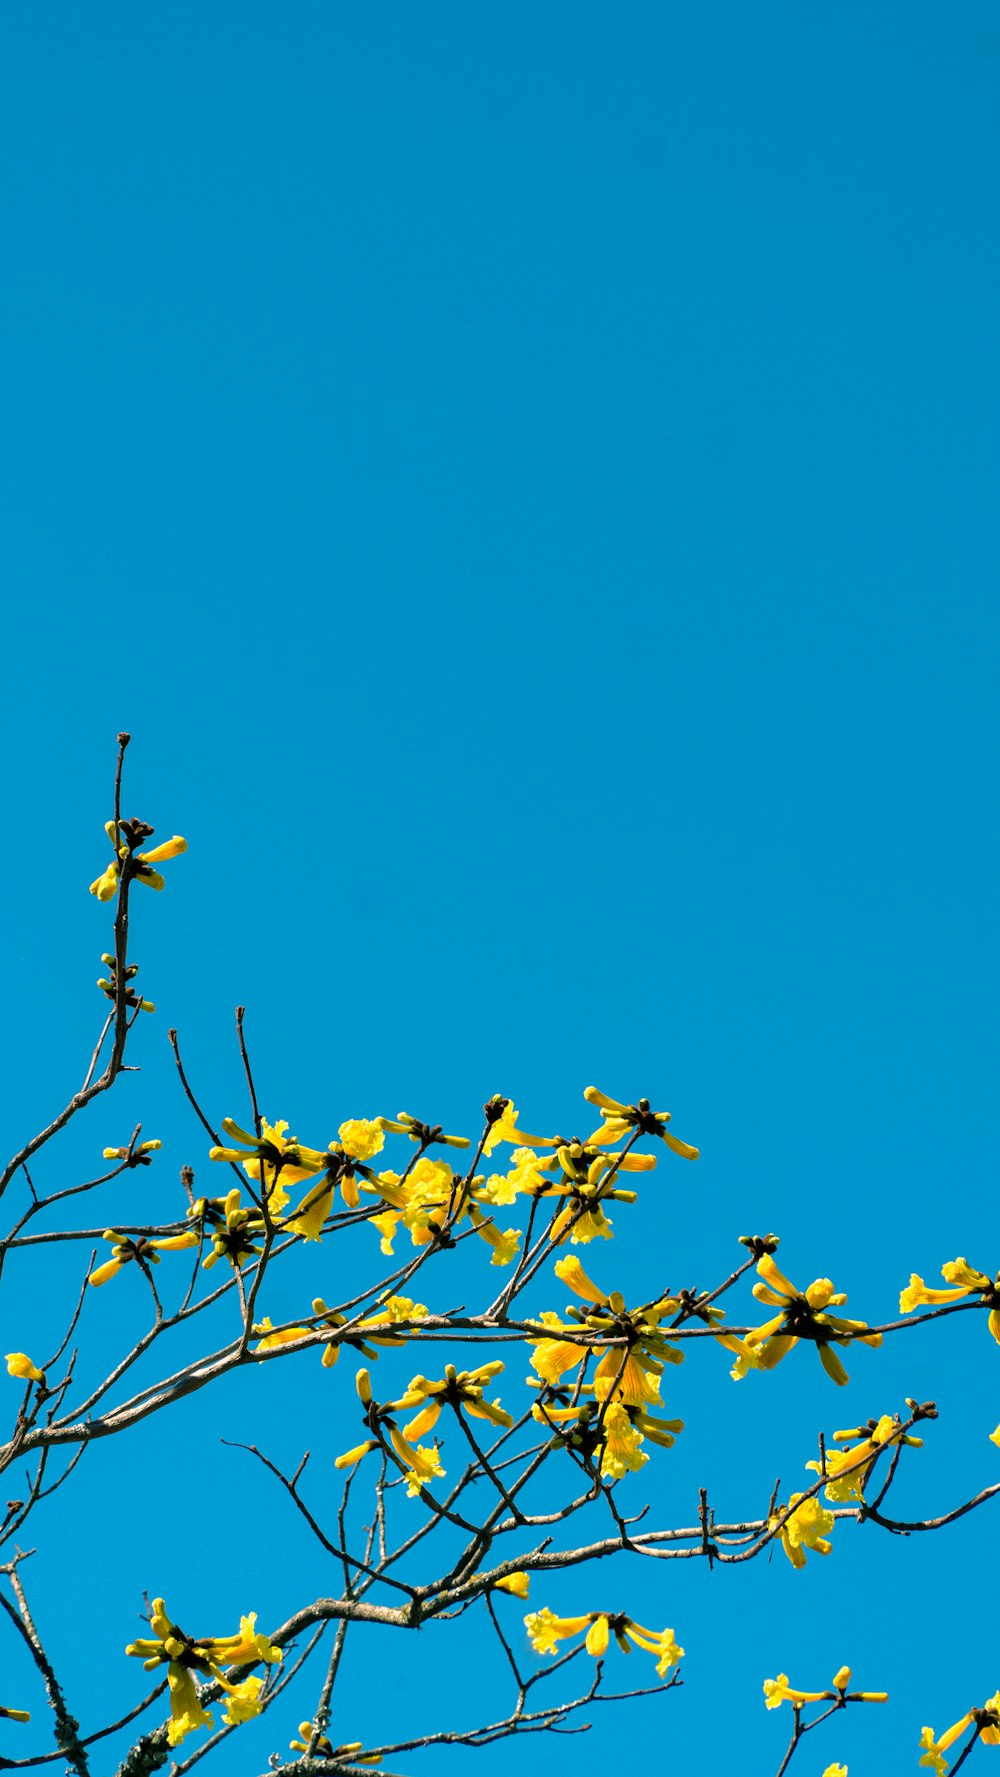 yellow flowers on brown tree branch under blue sky during daytime